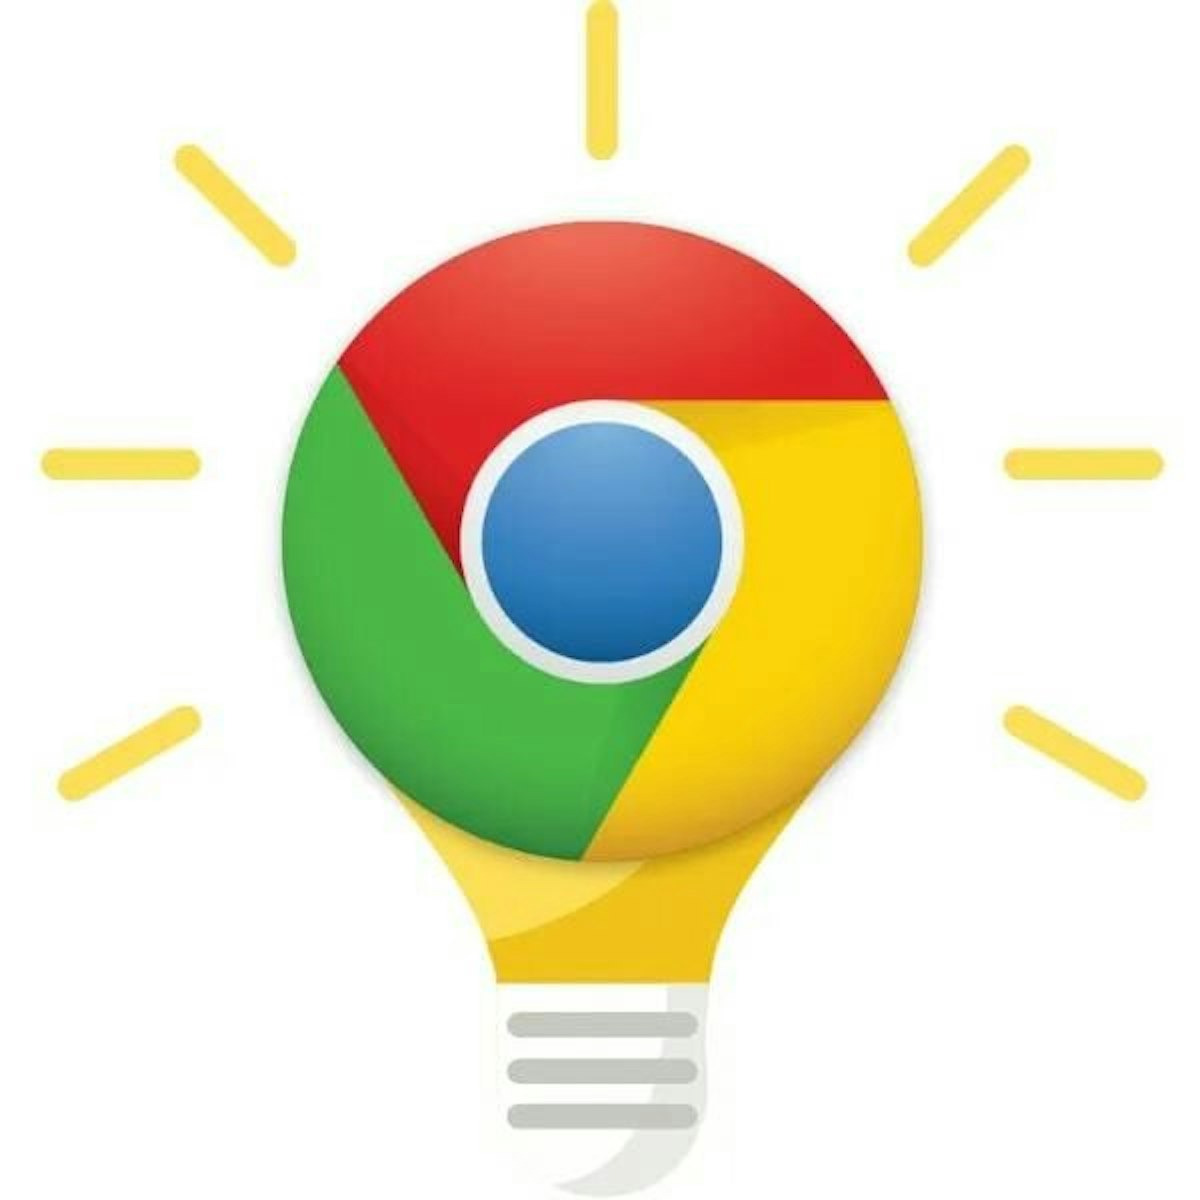 featured image - Want Chrome Extension Ideas? Here Are 9 That You Can Build This Year!